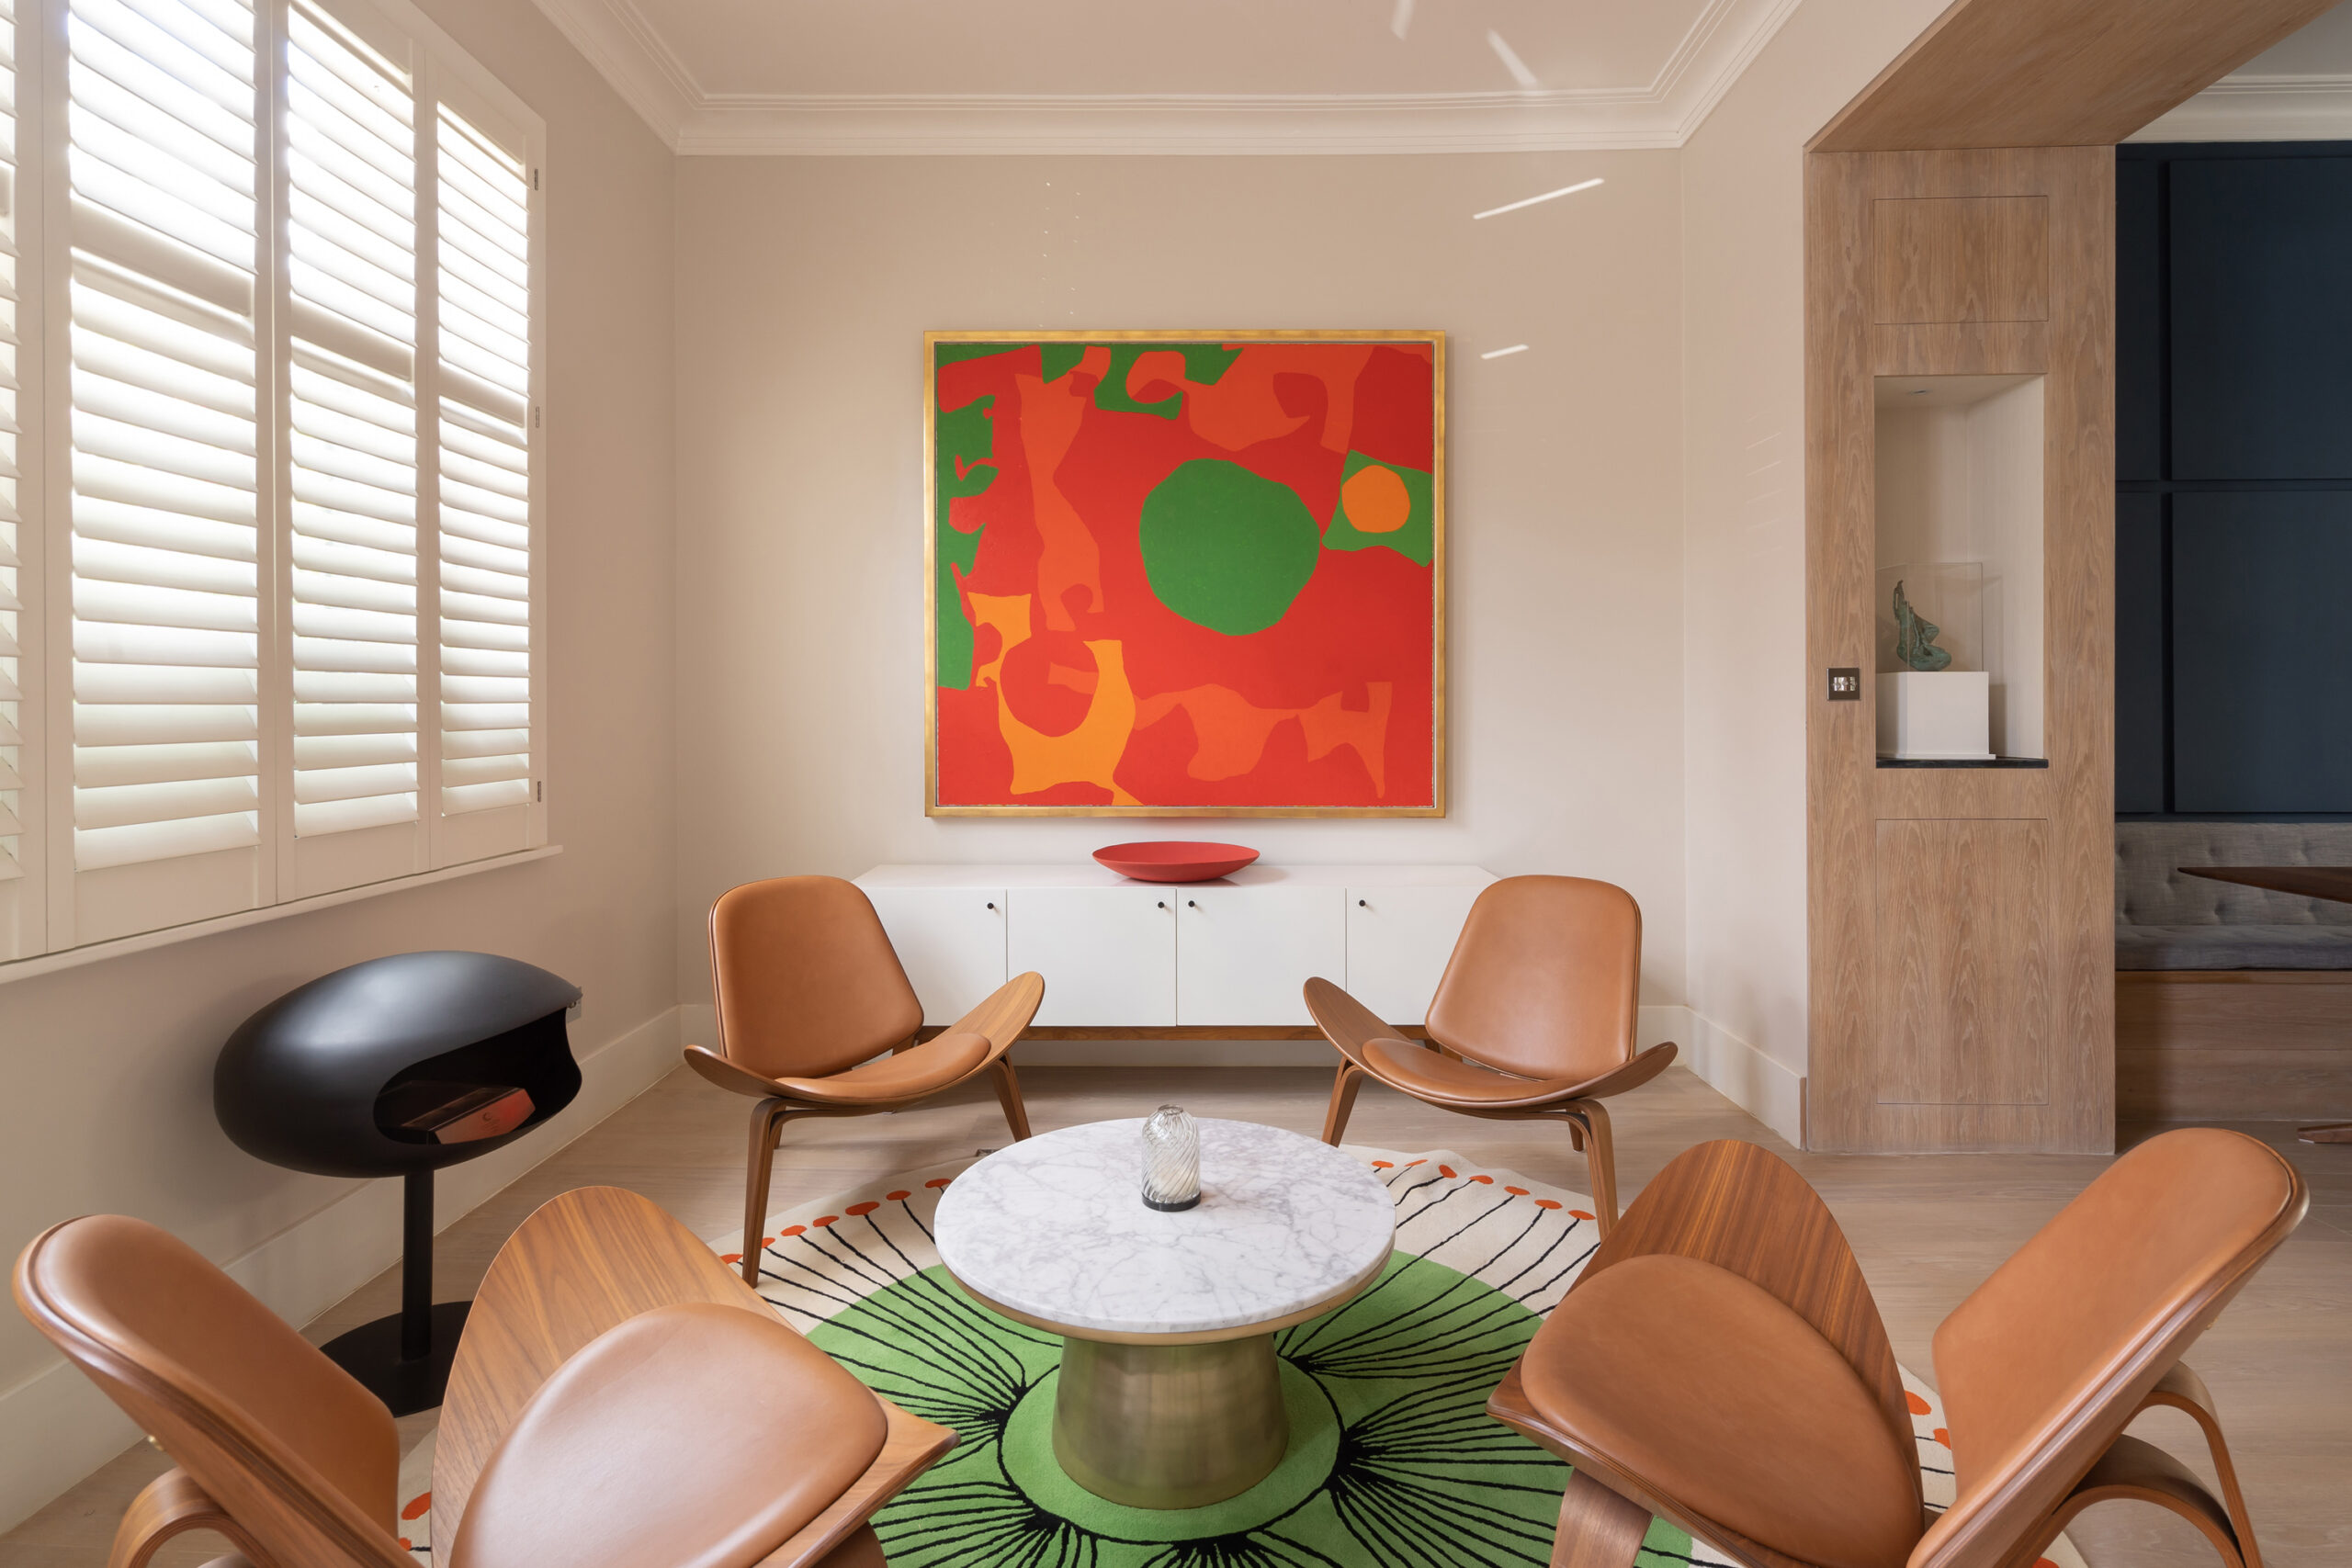 For Rent: Well Road Hampstead NW3 luxury living room with contemporary artwork and chairs